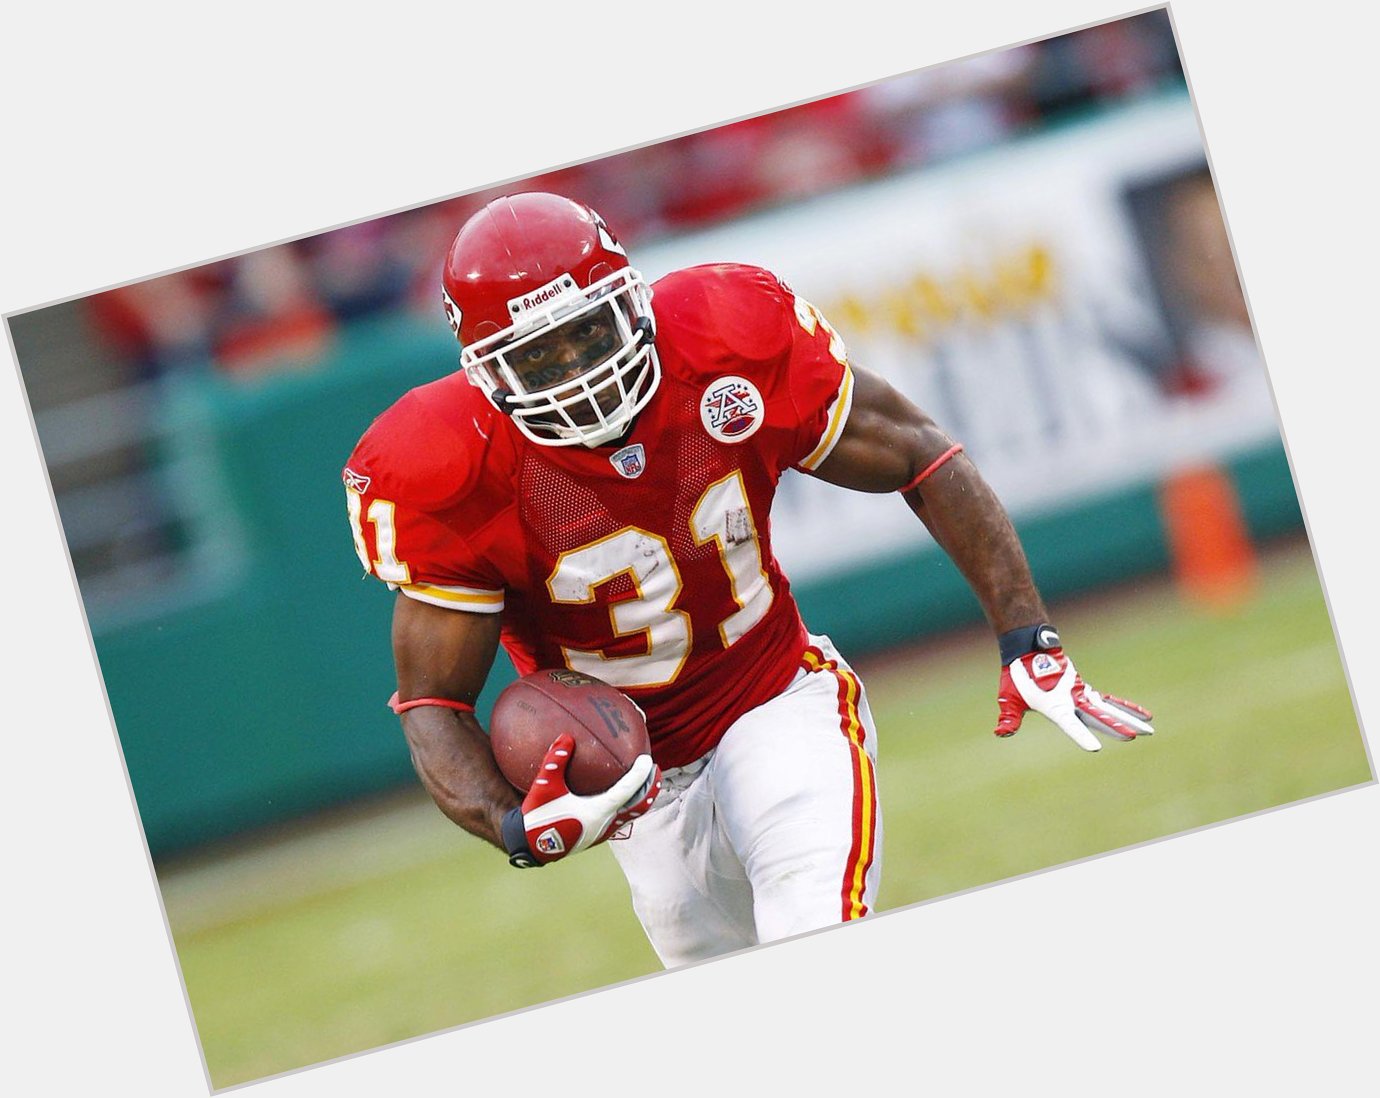 Happy Birthday to Priest Holmes who turns 44 today! 